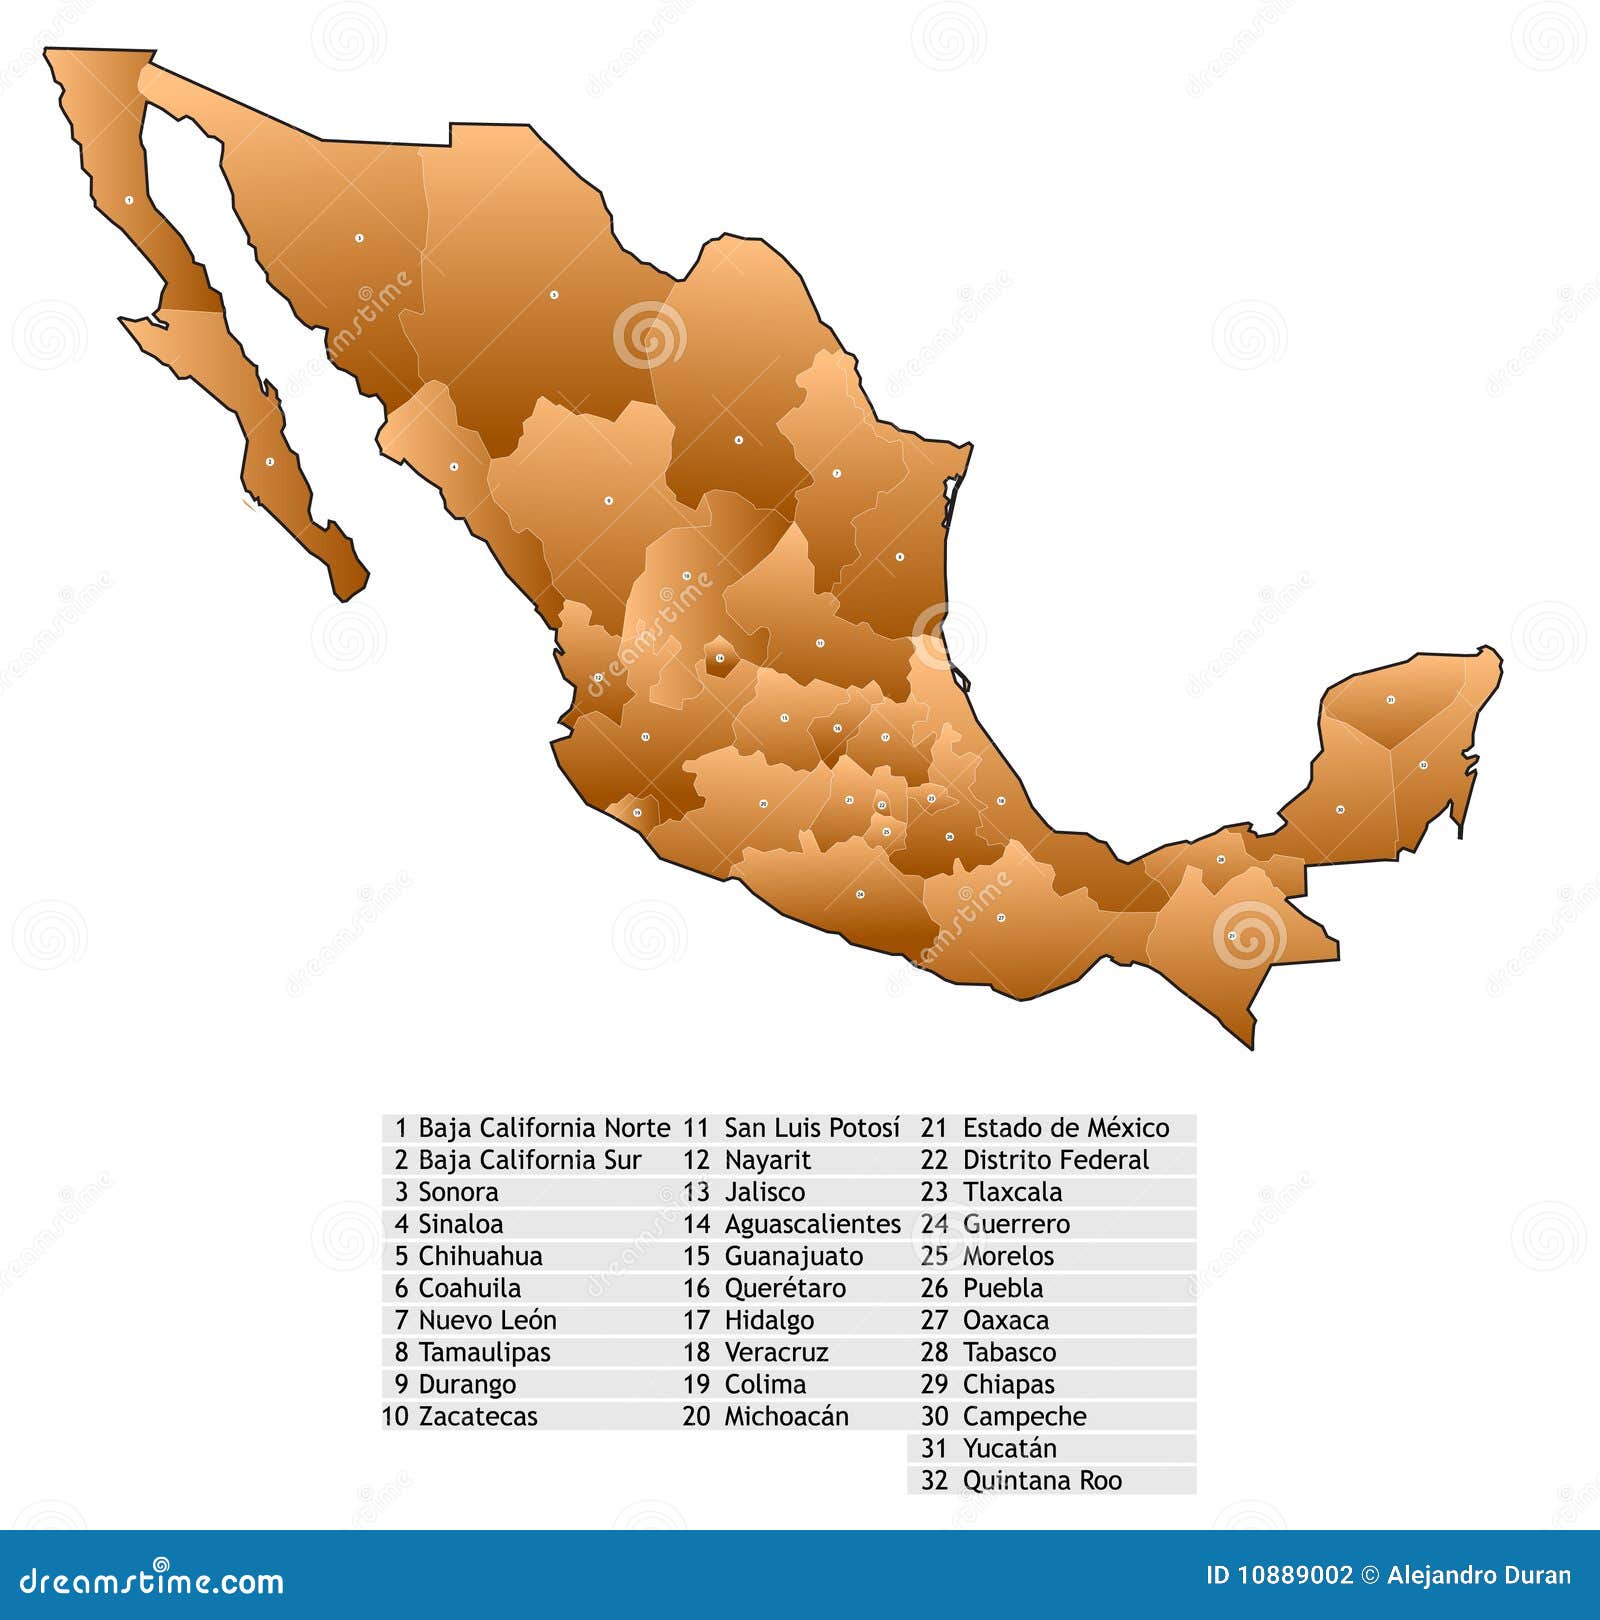 mexico-map-names-stock-photography-image-10889002